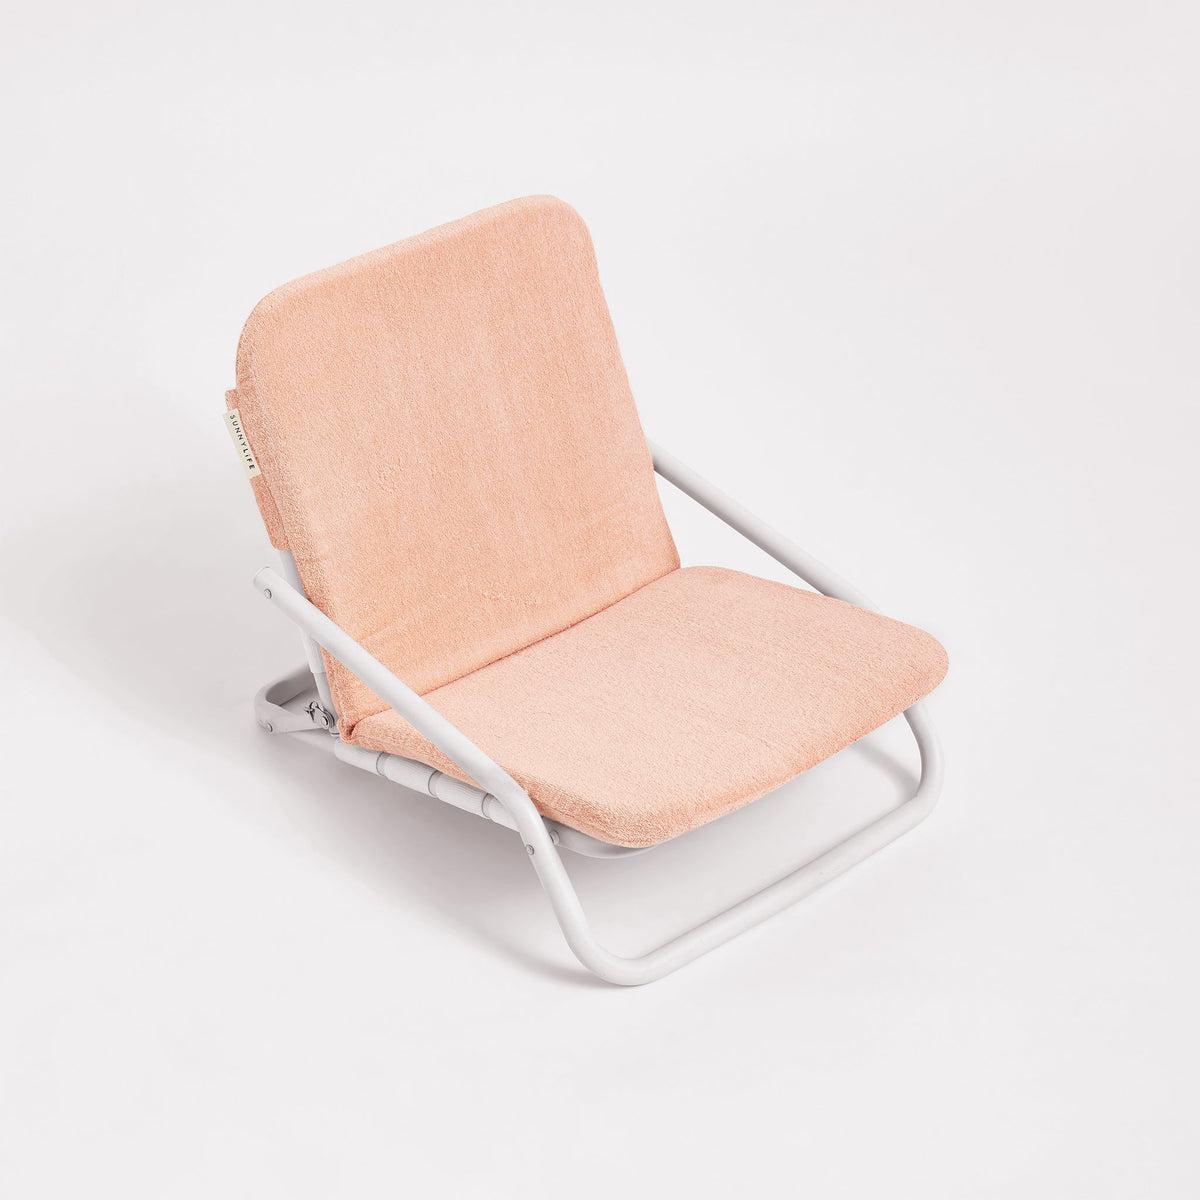 Cushioned Beach Chair - Salmon-Travel & Outdoors-Sunny Life-The Bay Room